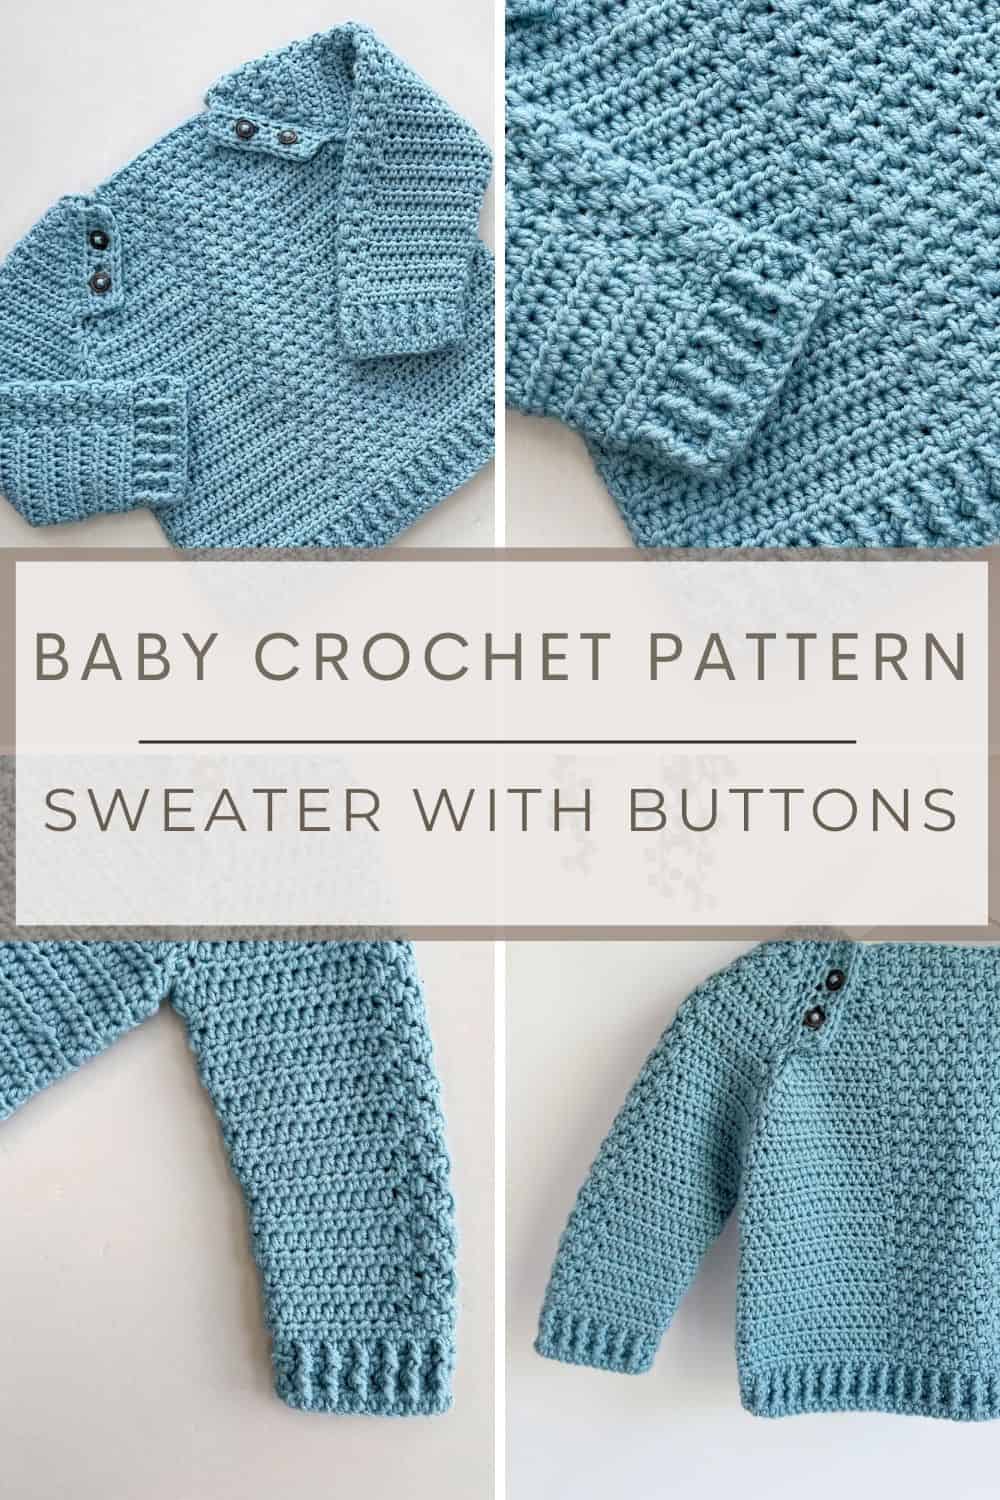 Four images showing easy crochet sweater pattern for babies with textured stitches.